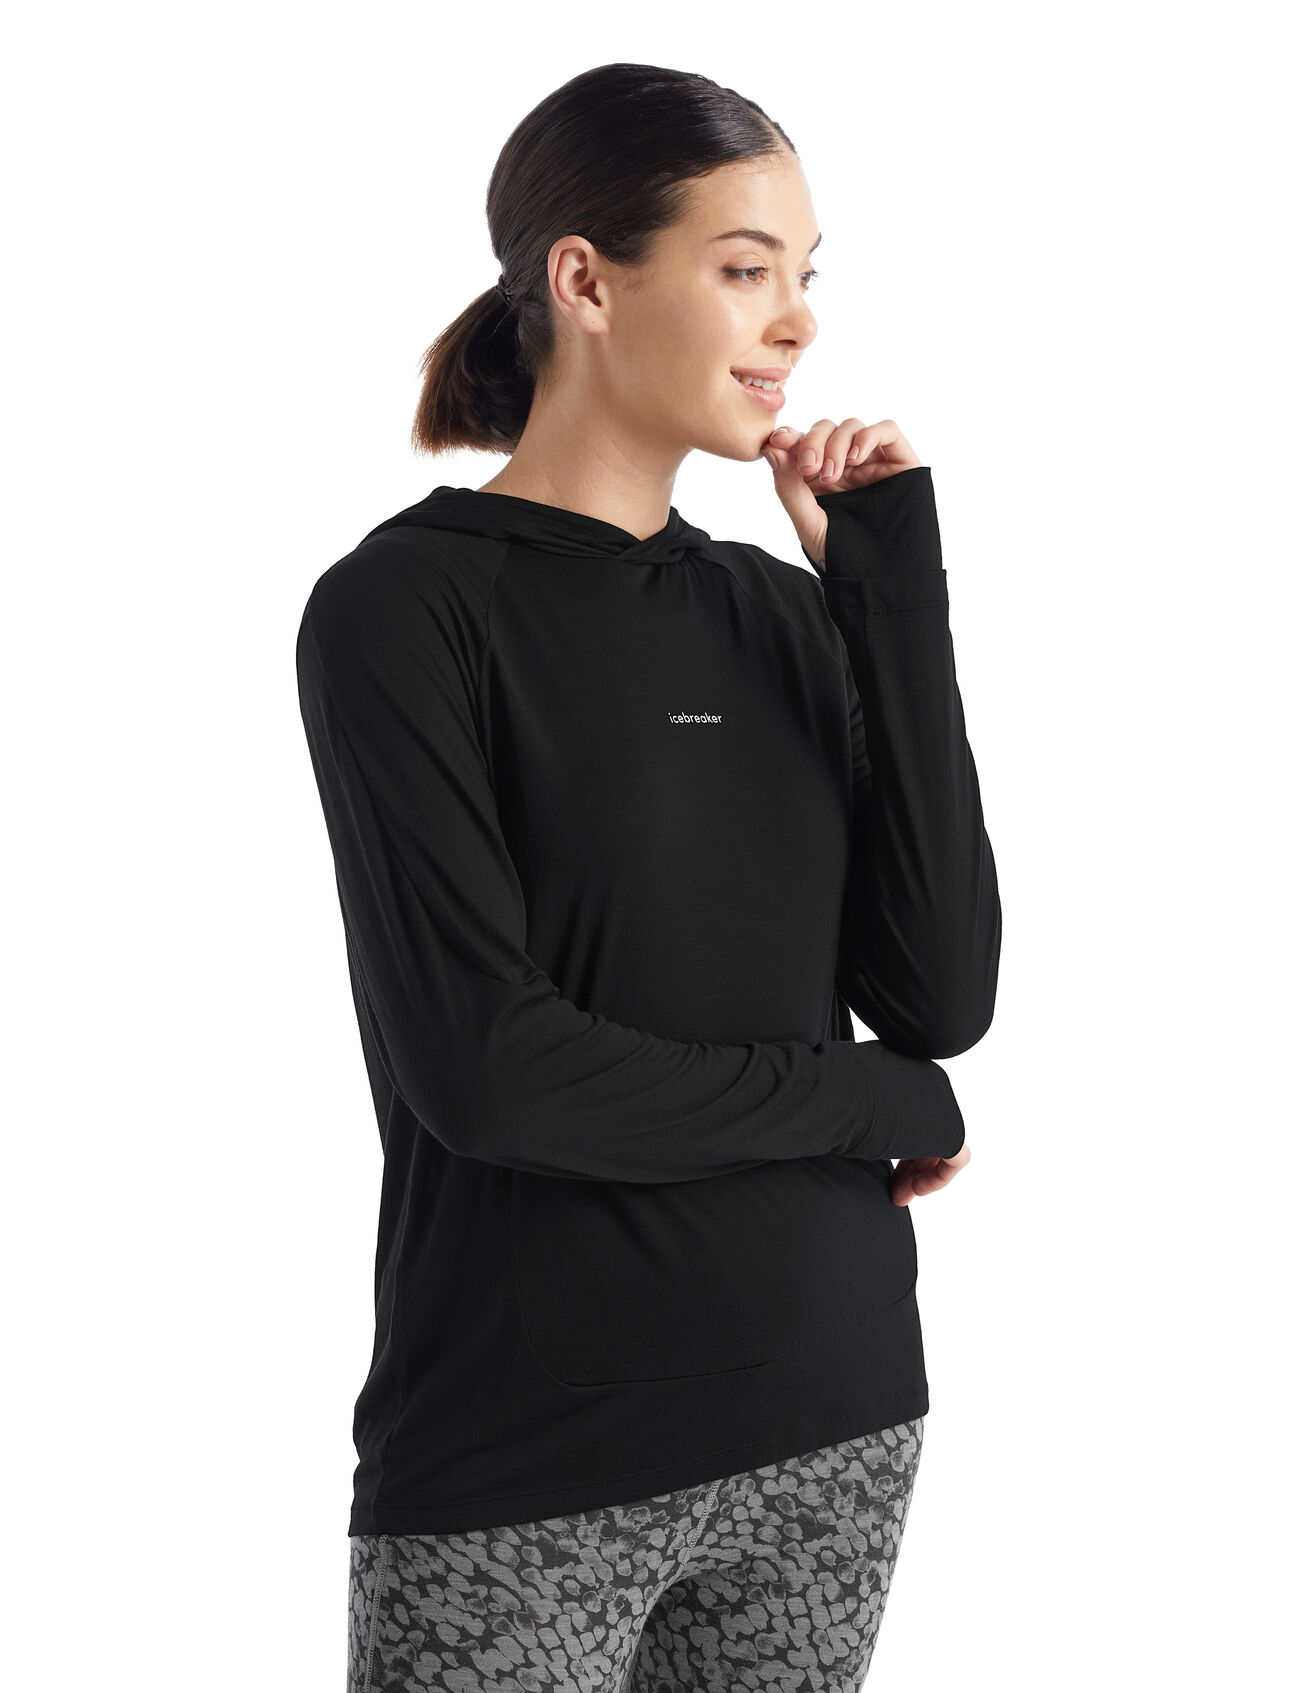 Womens Cool-Lite™ Merino Long Sleeve Hoodie A lightweight and breathable performance hoodie designed for aerobic days outside, the Cool-Lite™ Long Sleeve Hoodie features our moisture-wicking Cool-Lite™ merino jersey fabric.